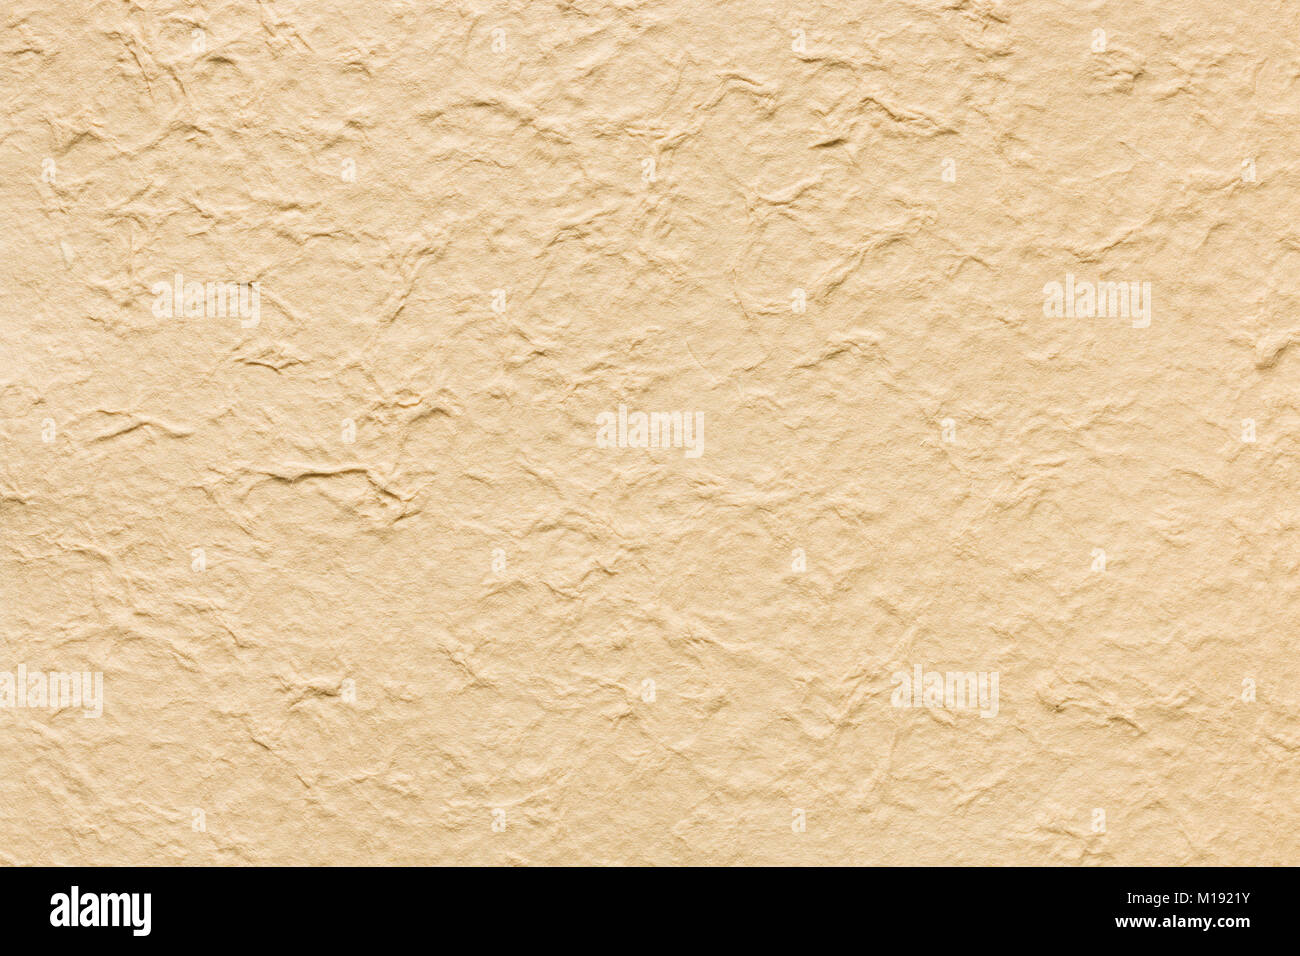 Crumpled Brown Wrapping Paper Texture Stock Image - Image of aged, kraft:  218939295